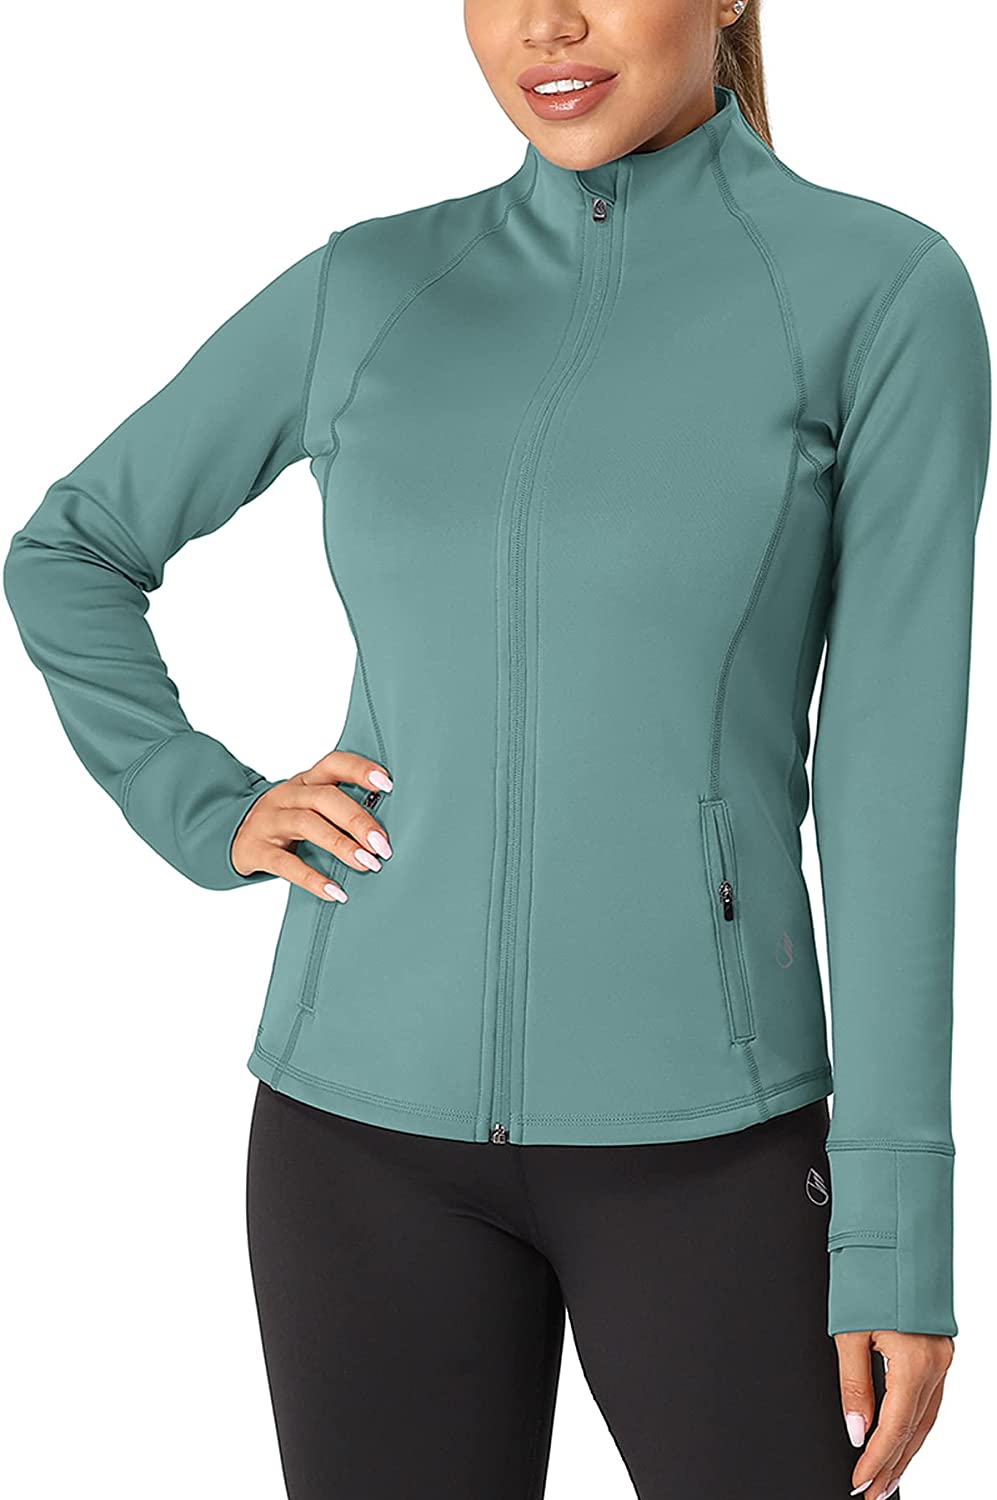 icyzone Workout Zip Up Jackets for Women Yoga Running Athletic Track Jacket with Thumb Holes 